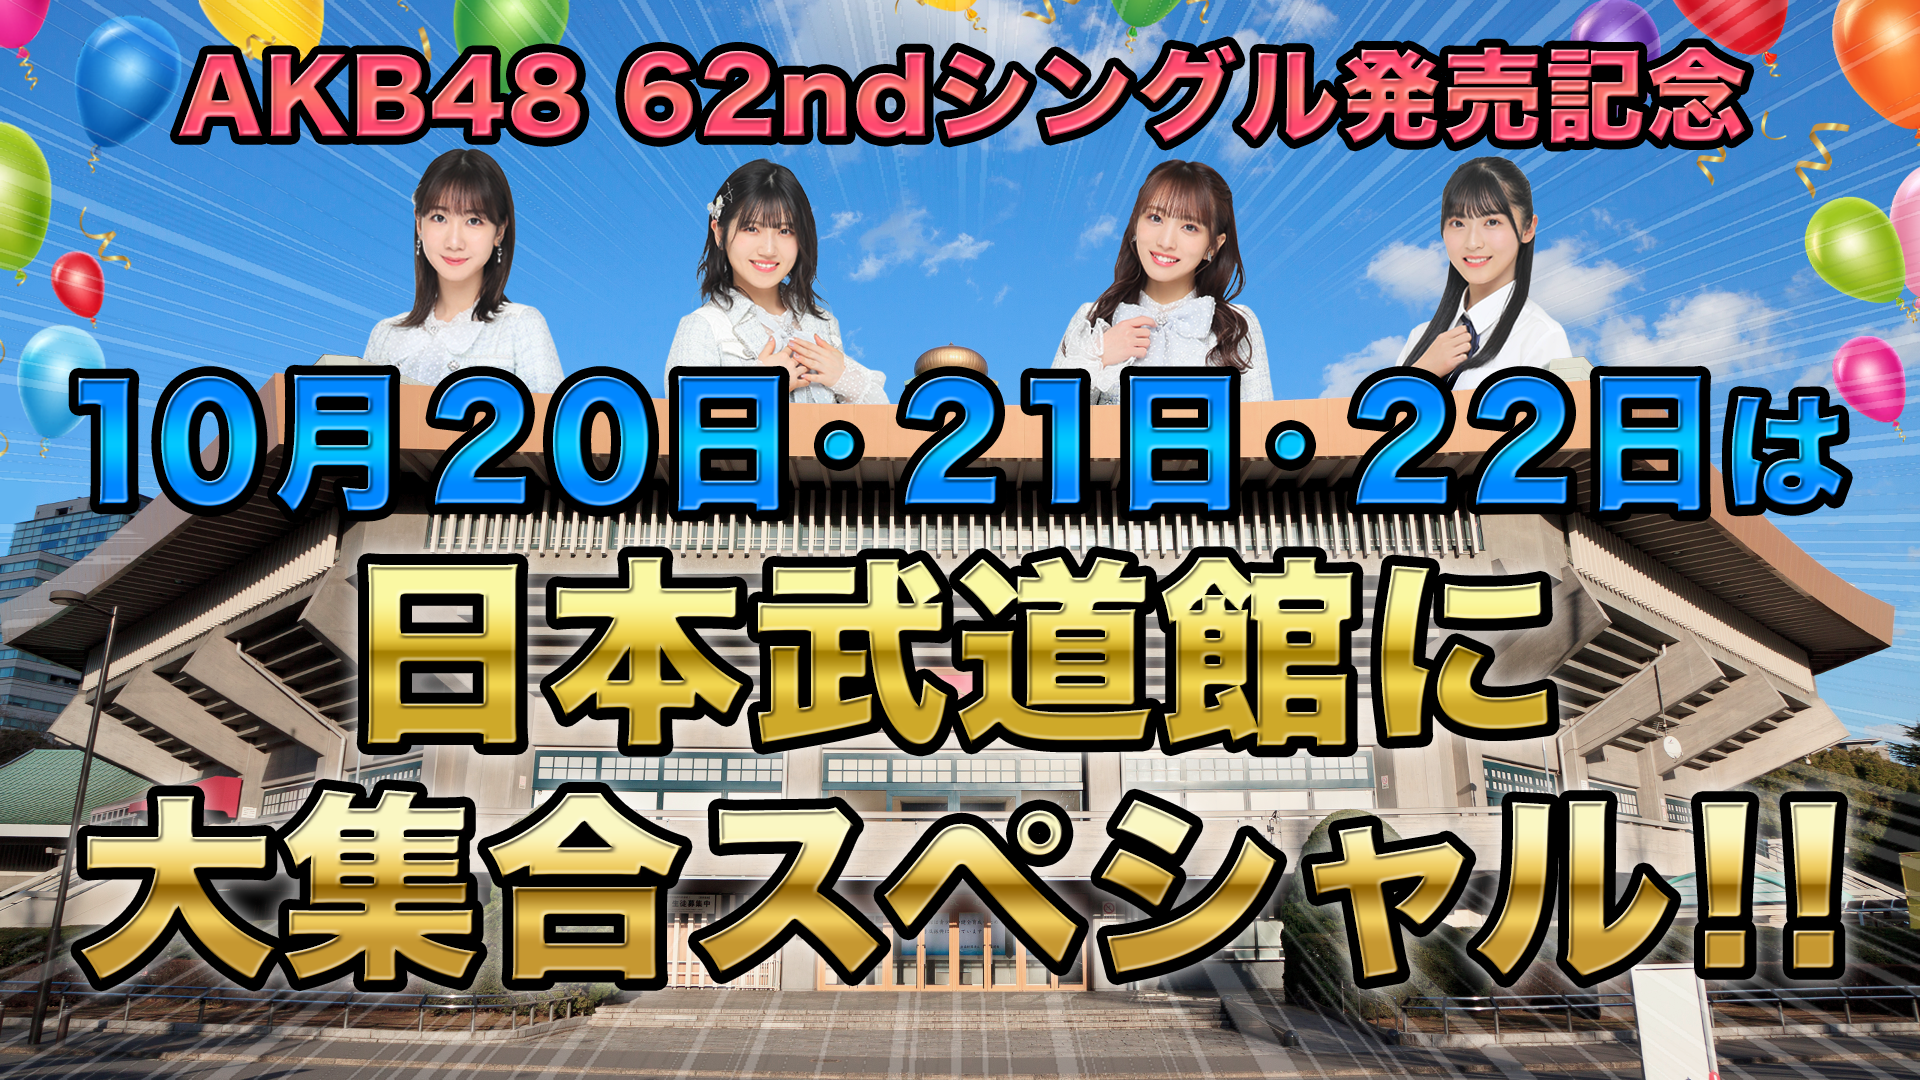 AKB48 62nd Single Release Commemoration October 20, 21, 22 at Nippon  Budokan Special!